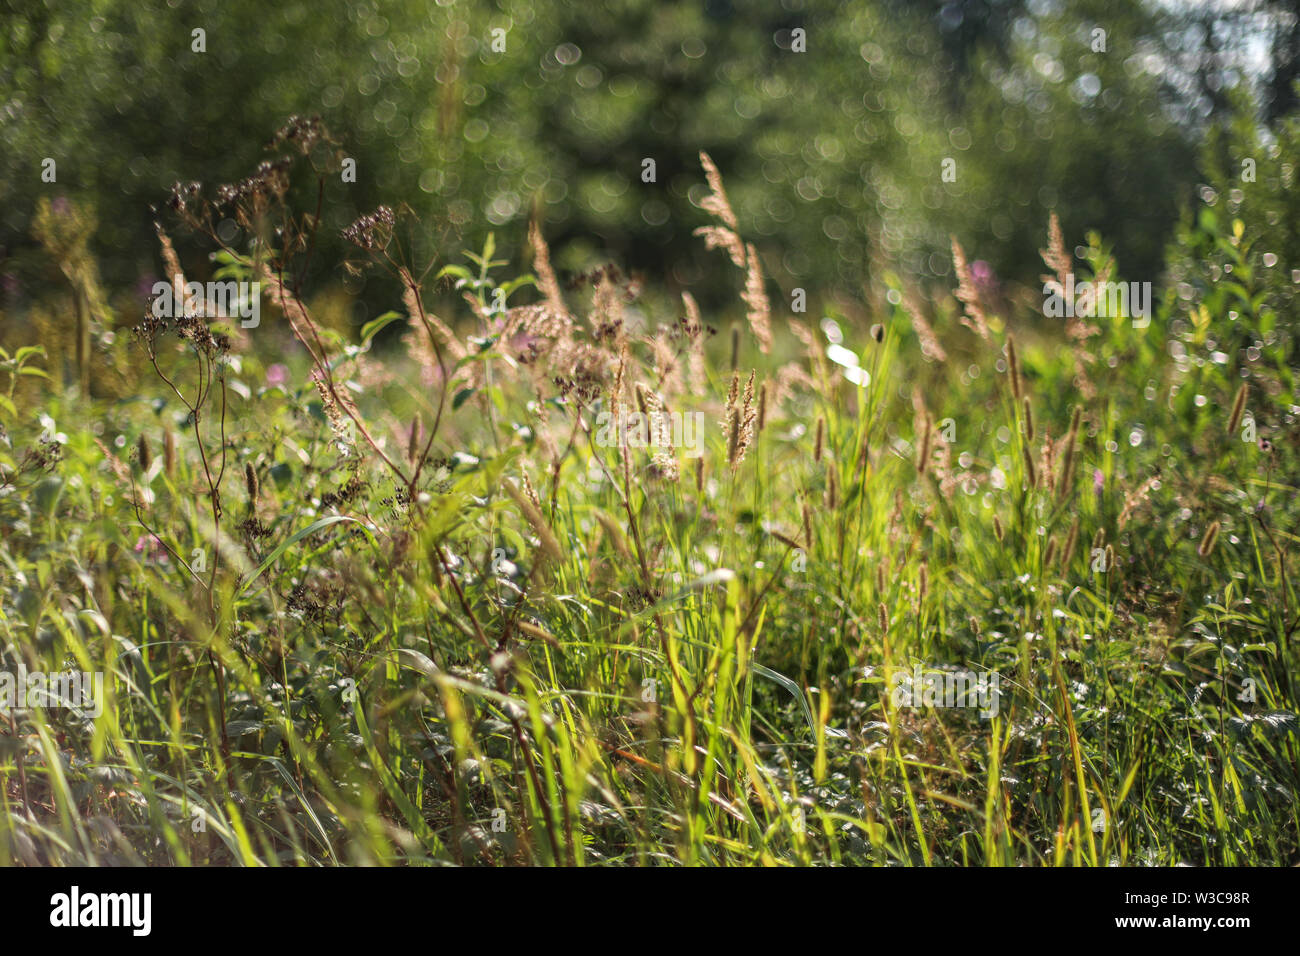 Summer weed and grass on a dirt road side in Ylöjärvi, Finland Stock Photo